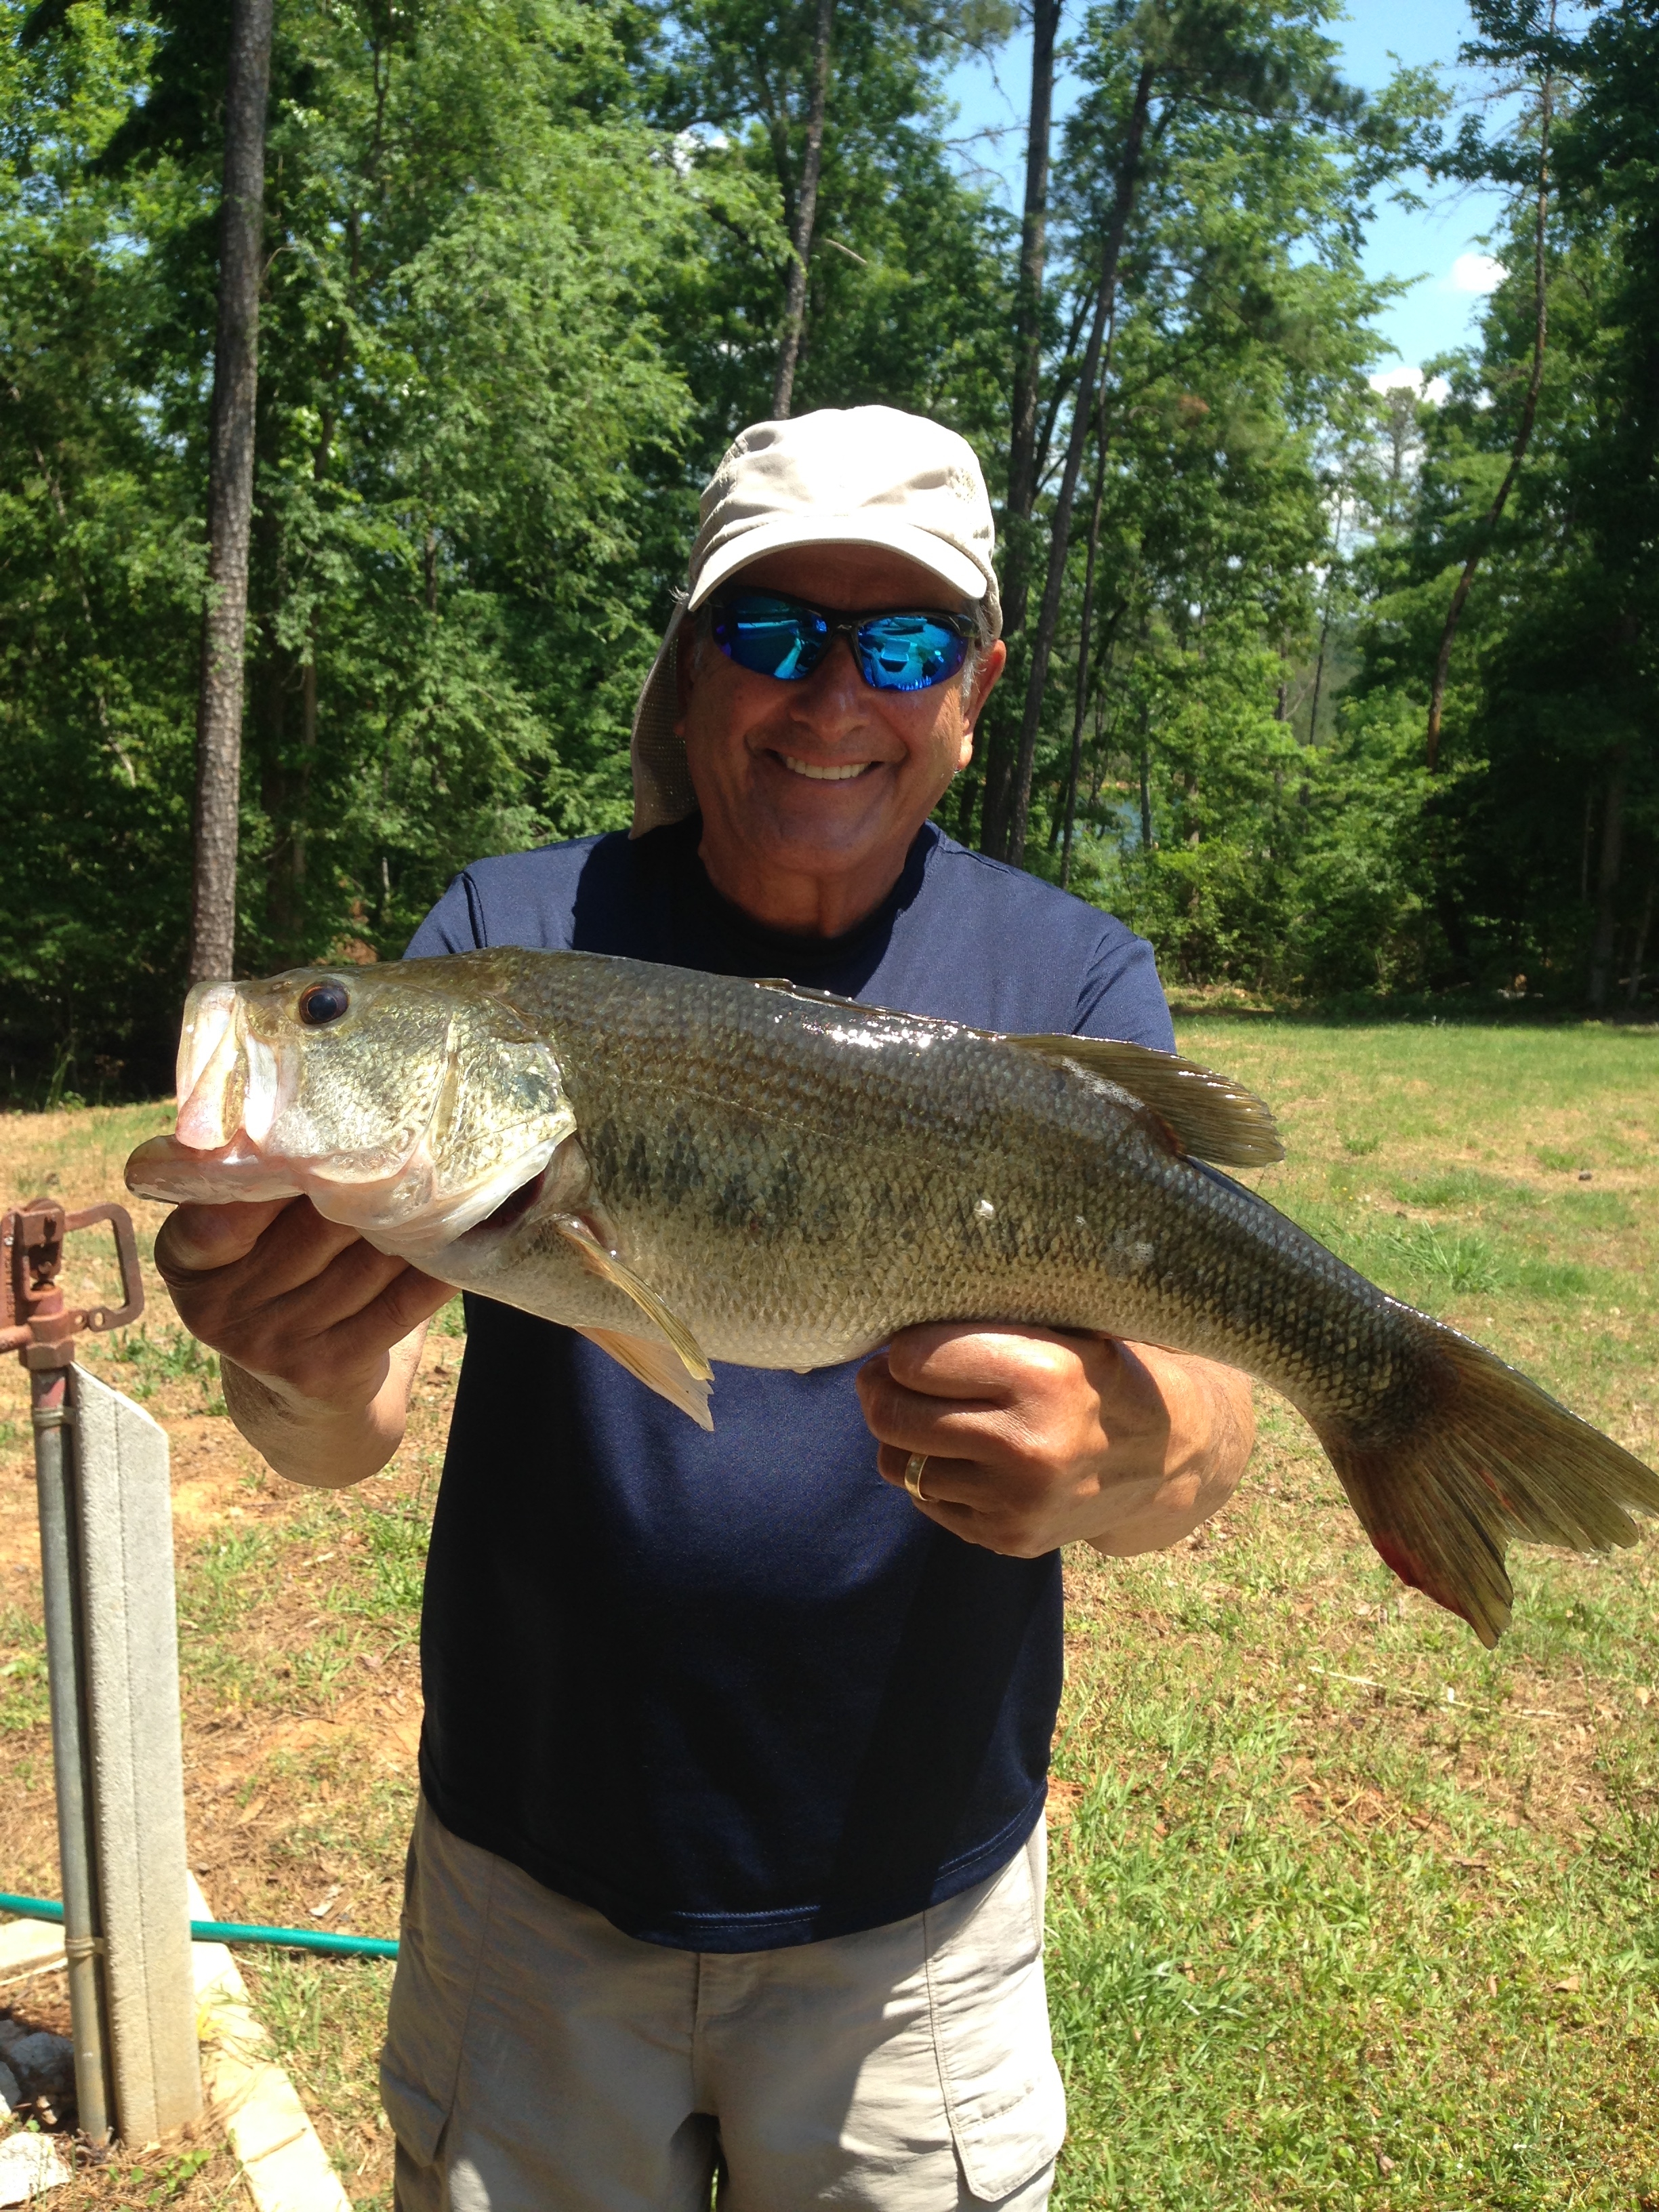 May 9, 2018 Dave Chiera with his 8 lb large mouth bass.